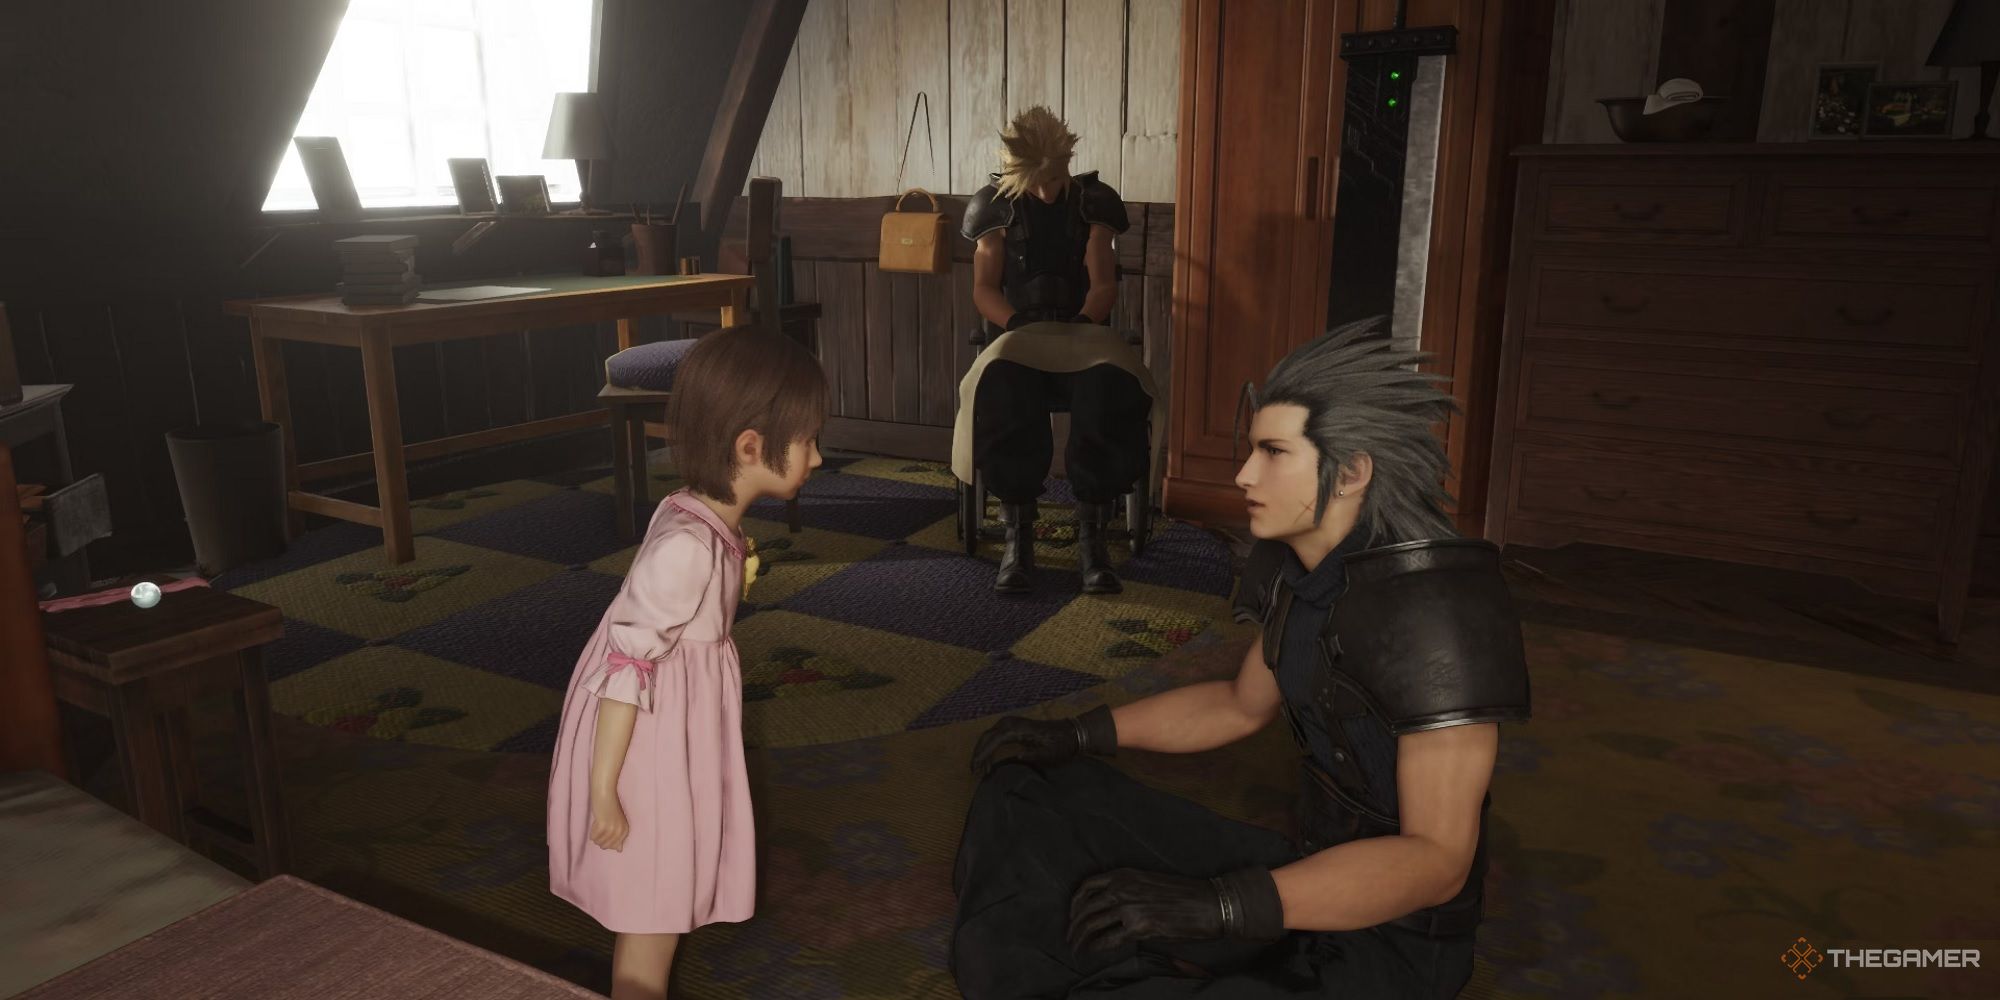 Zack talking to Marlene while Cloud is comatose in a chair between them in Final Fantasy 7 Rebirth